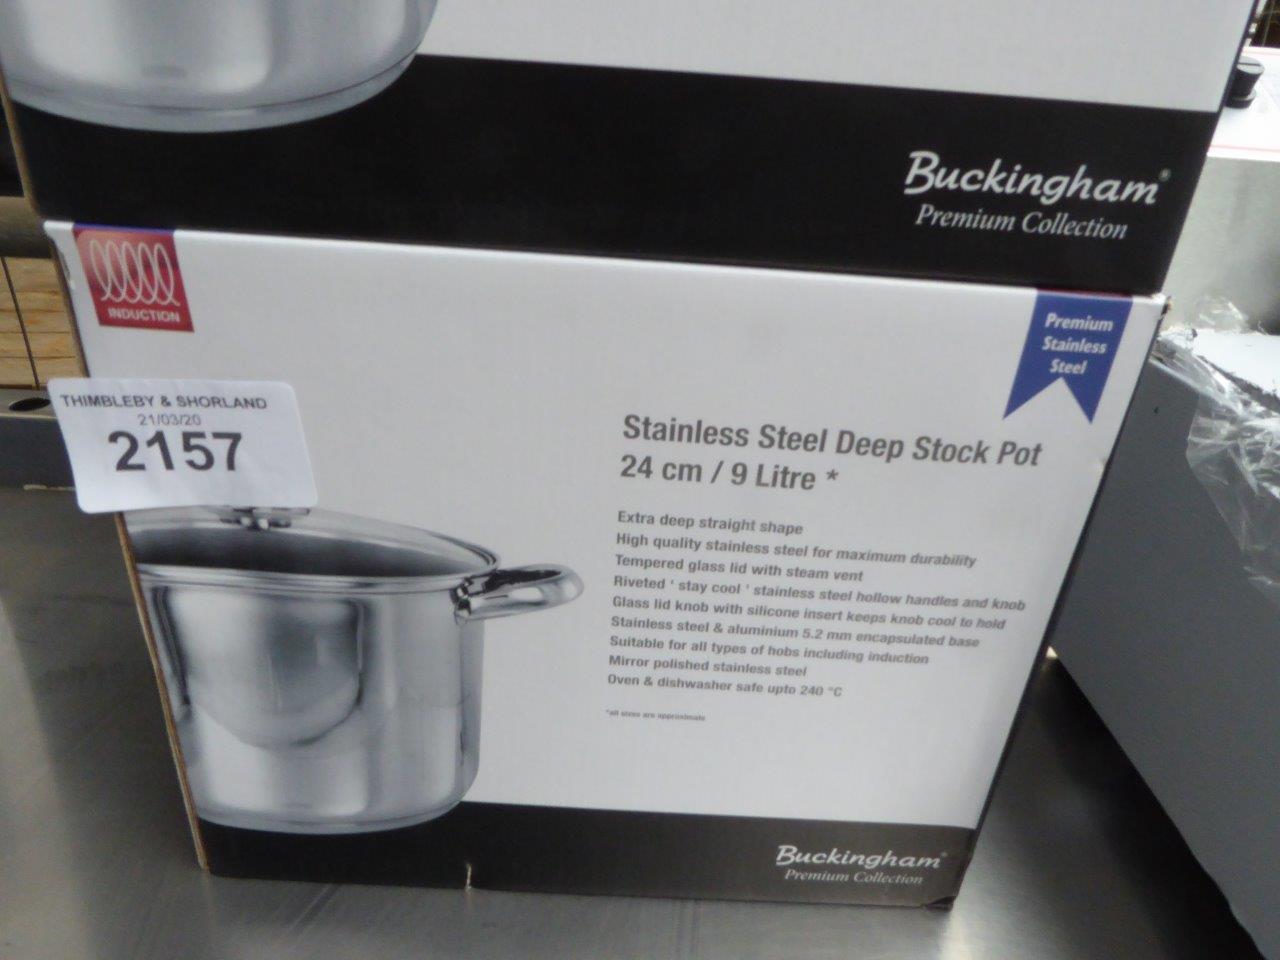 Deep 9 litre stock pot with lid for induction hobs.